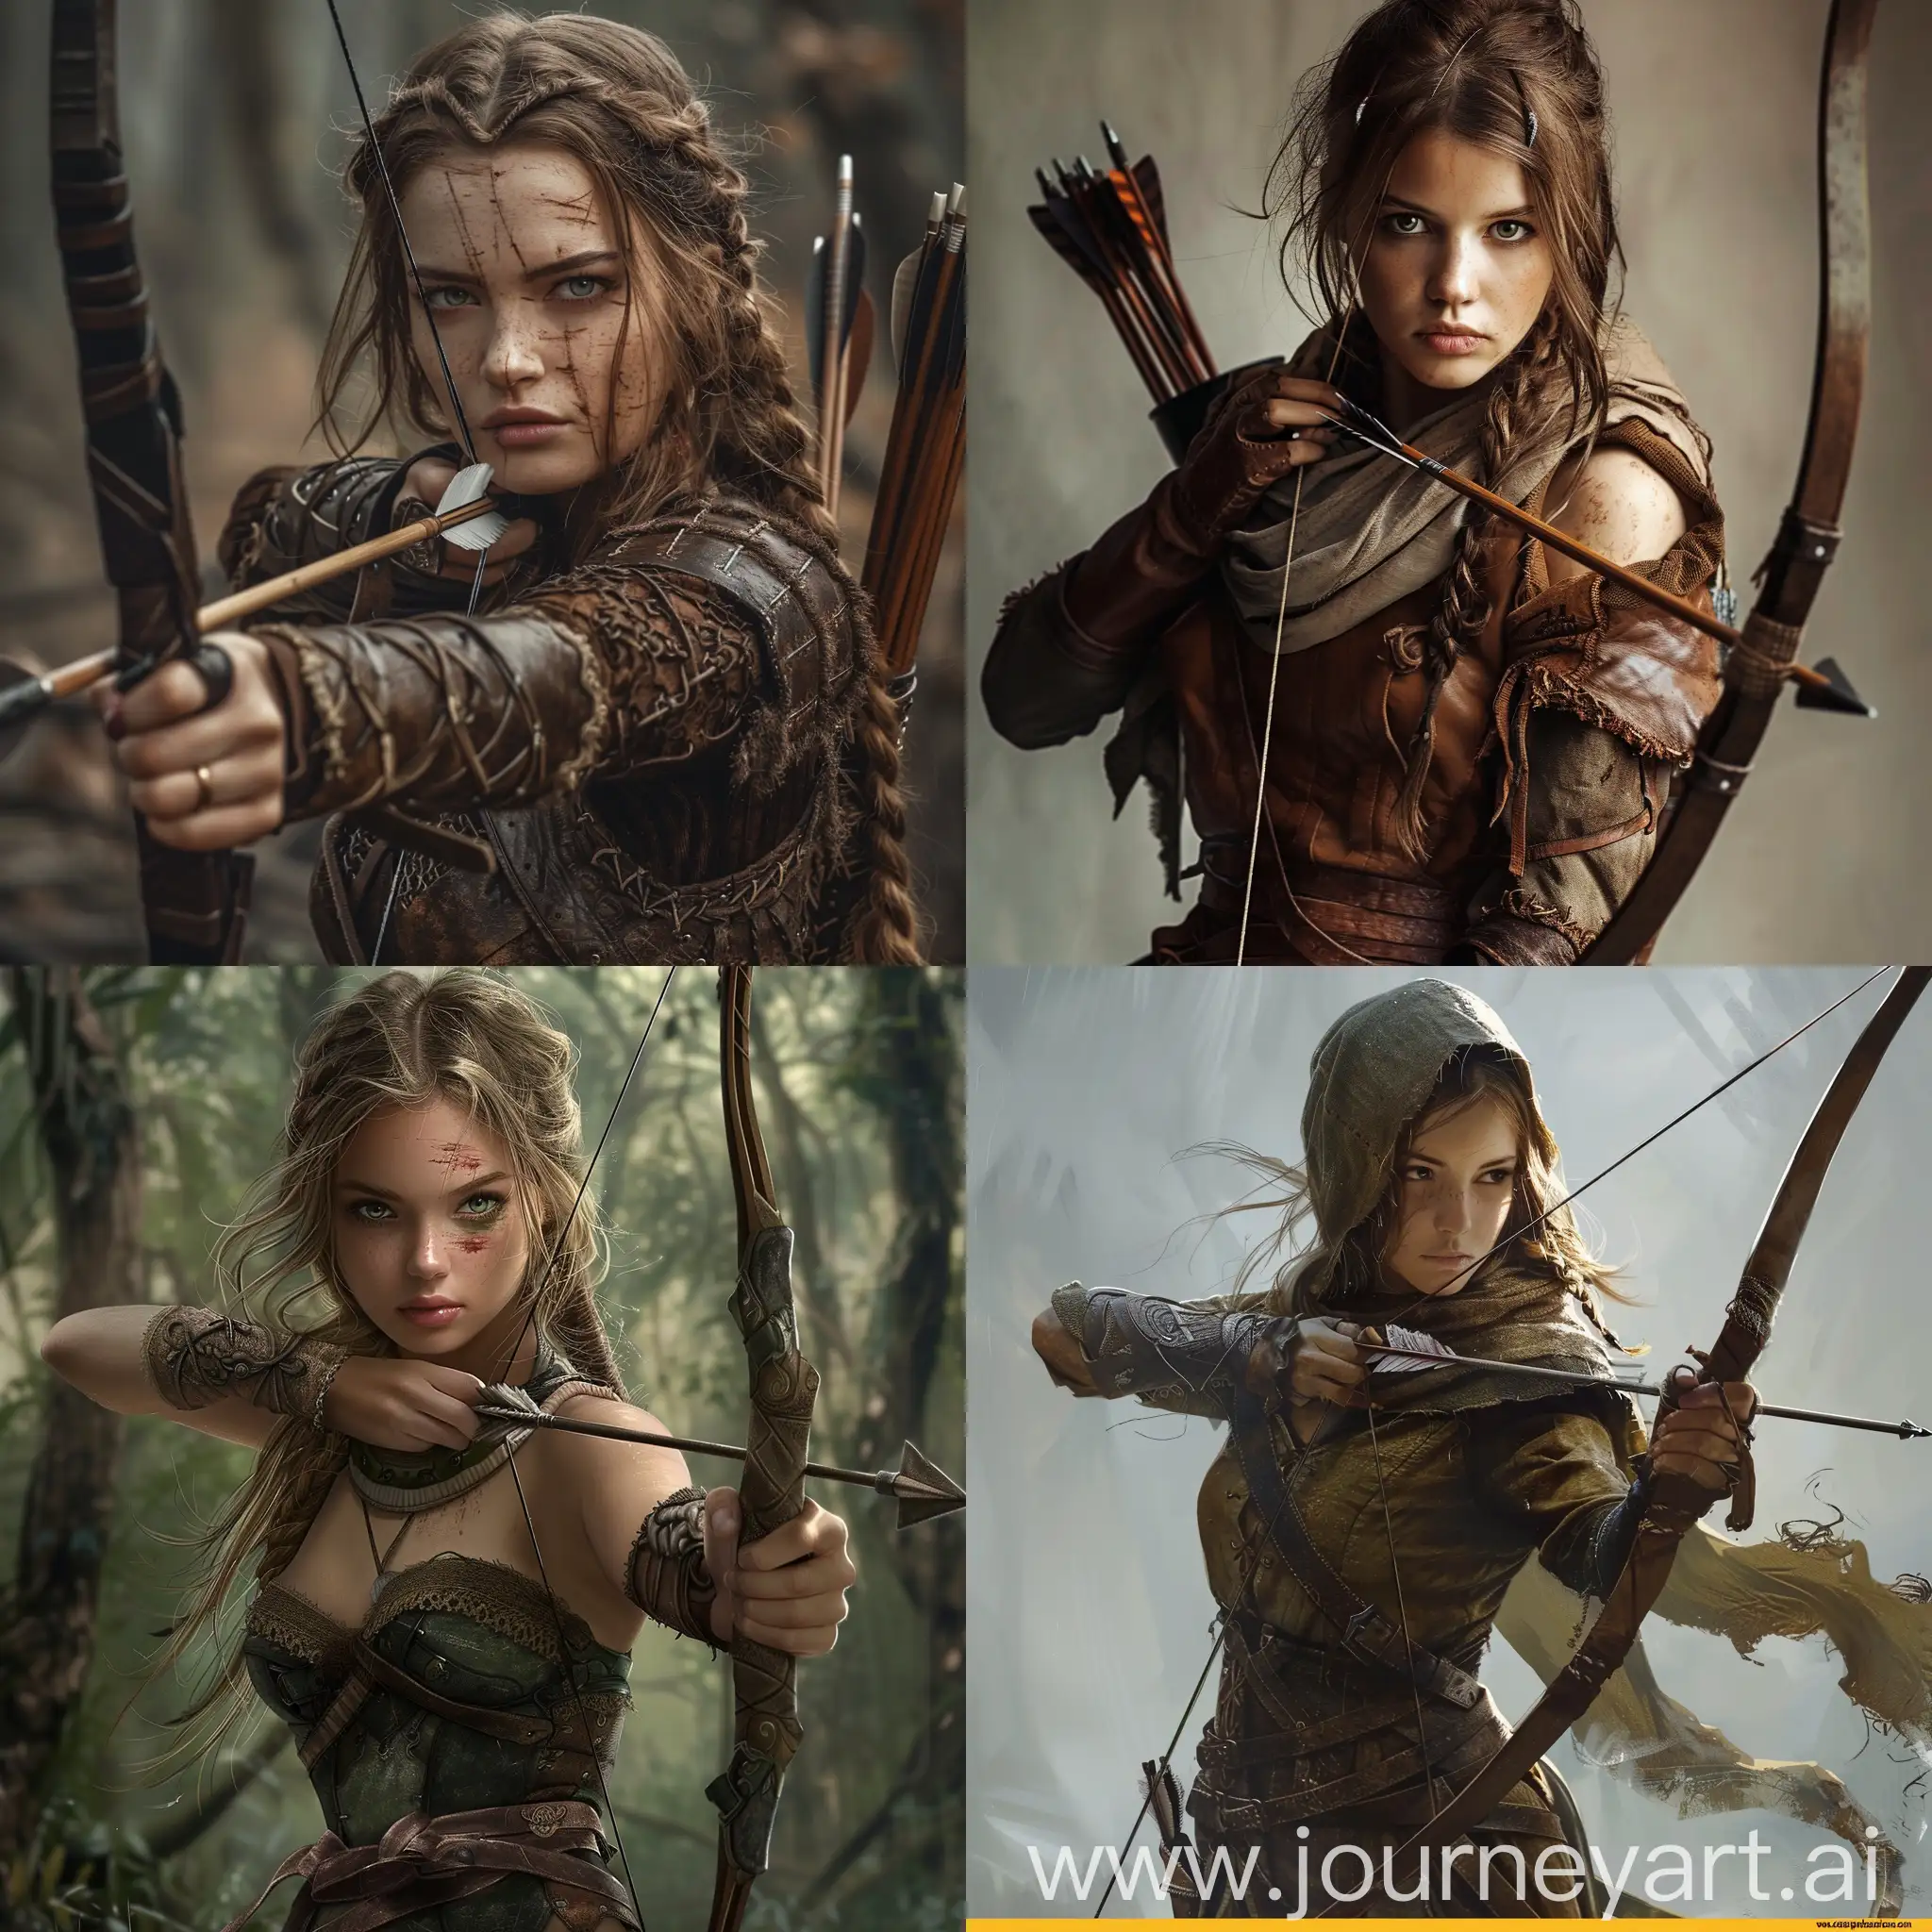 Medieval-Archer-Gkbr-Warrior-Girl-in-Realistic-Style